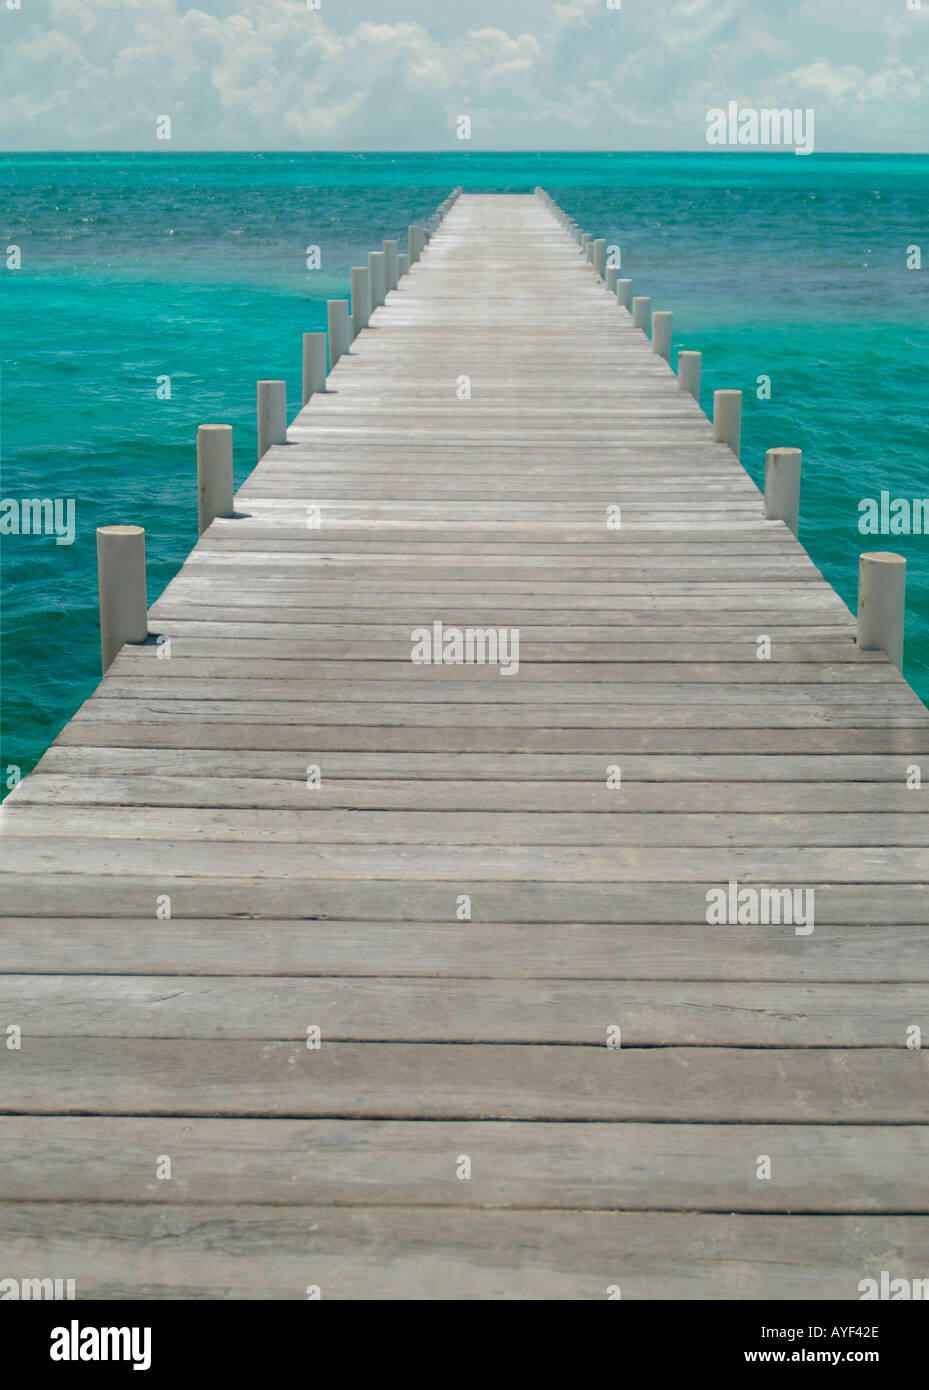 A long wooden pier juts into the Caribbean Sea Stock Photo